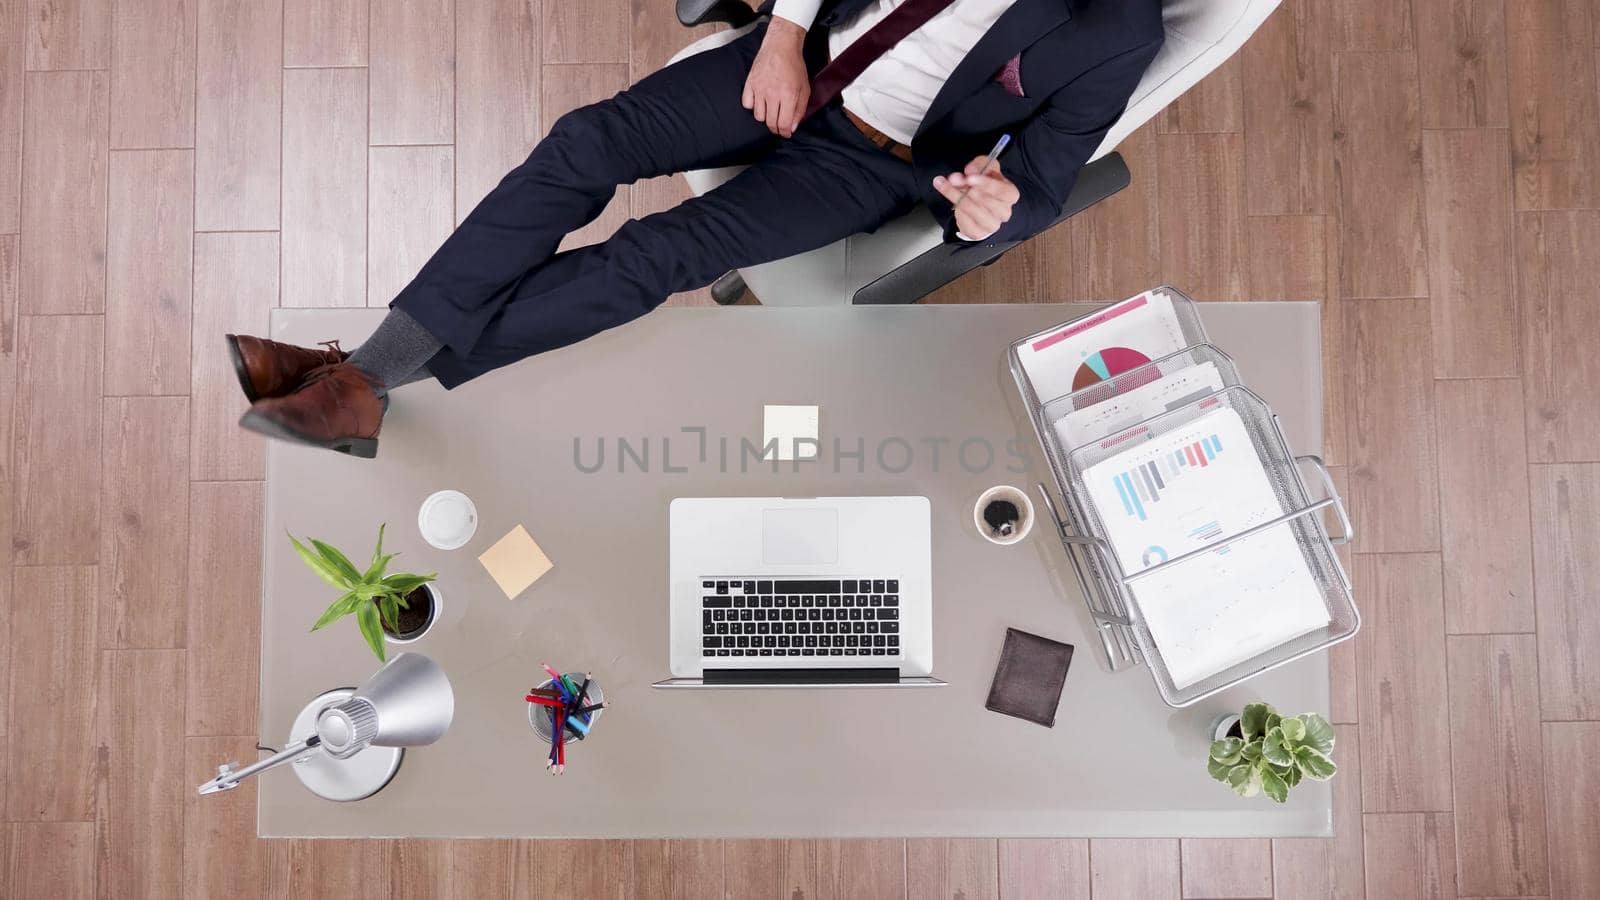 Top view of businessman in suit staying relaxed with feet on office desk by DCStudio